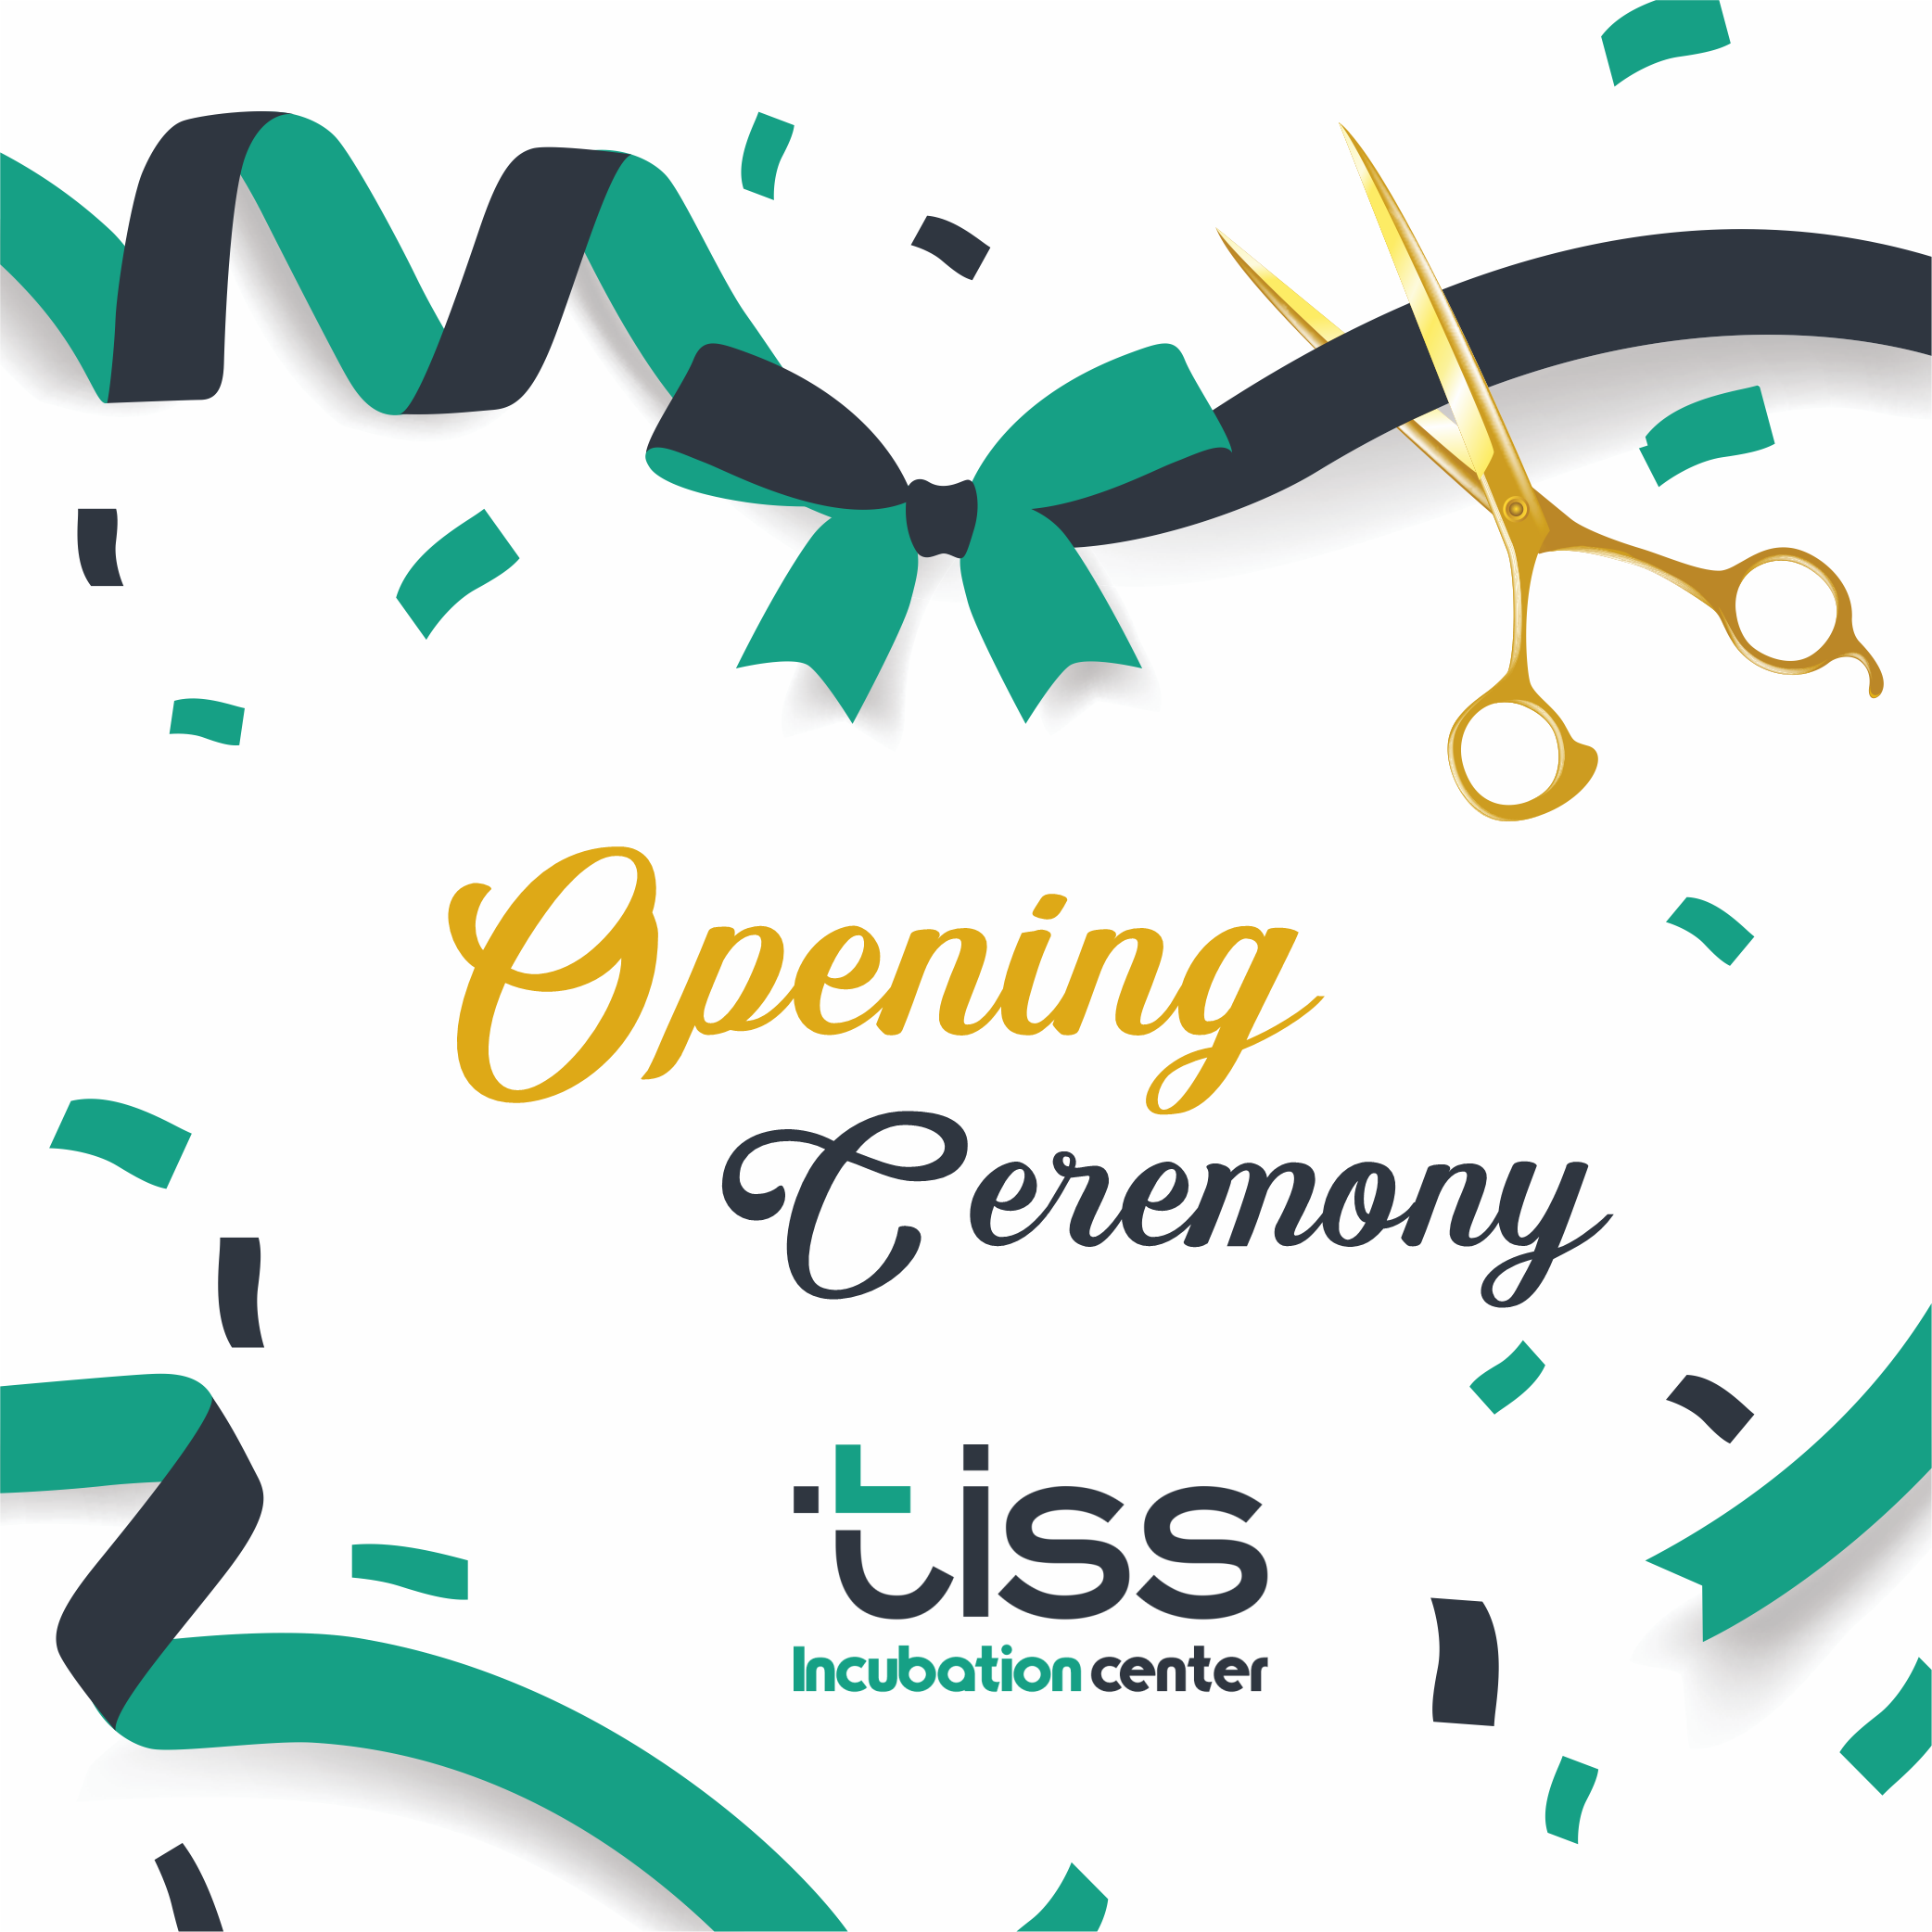 You are currently viewing Opening Ceremony of TISS Incubation Center